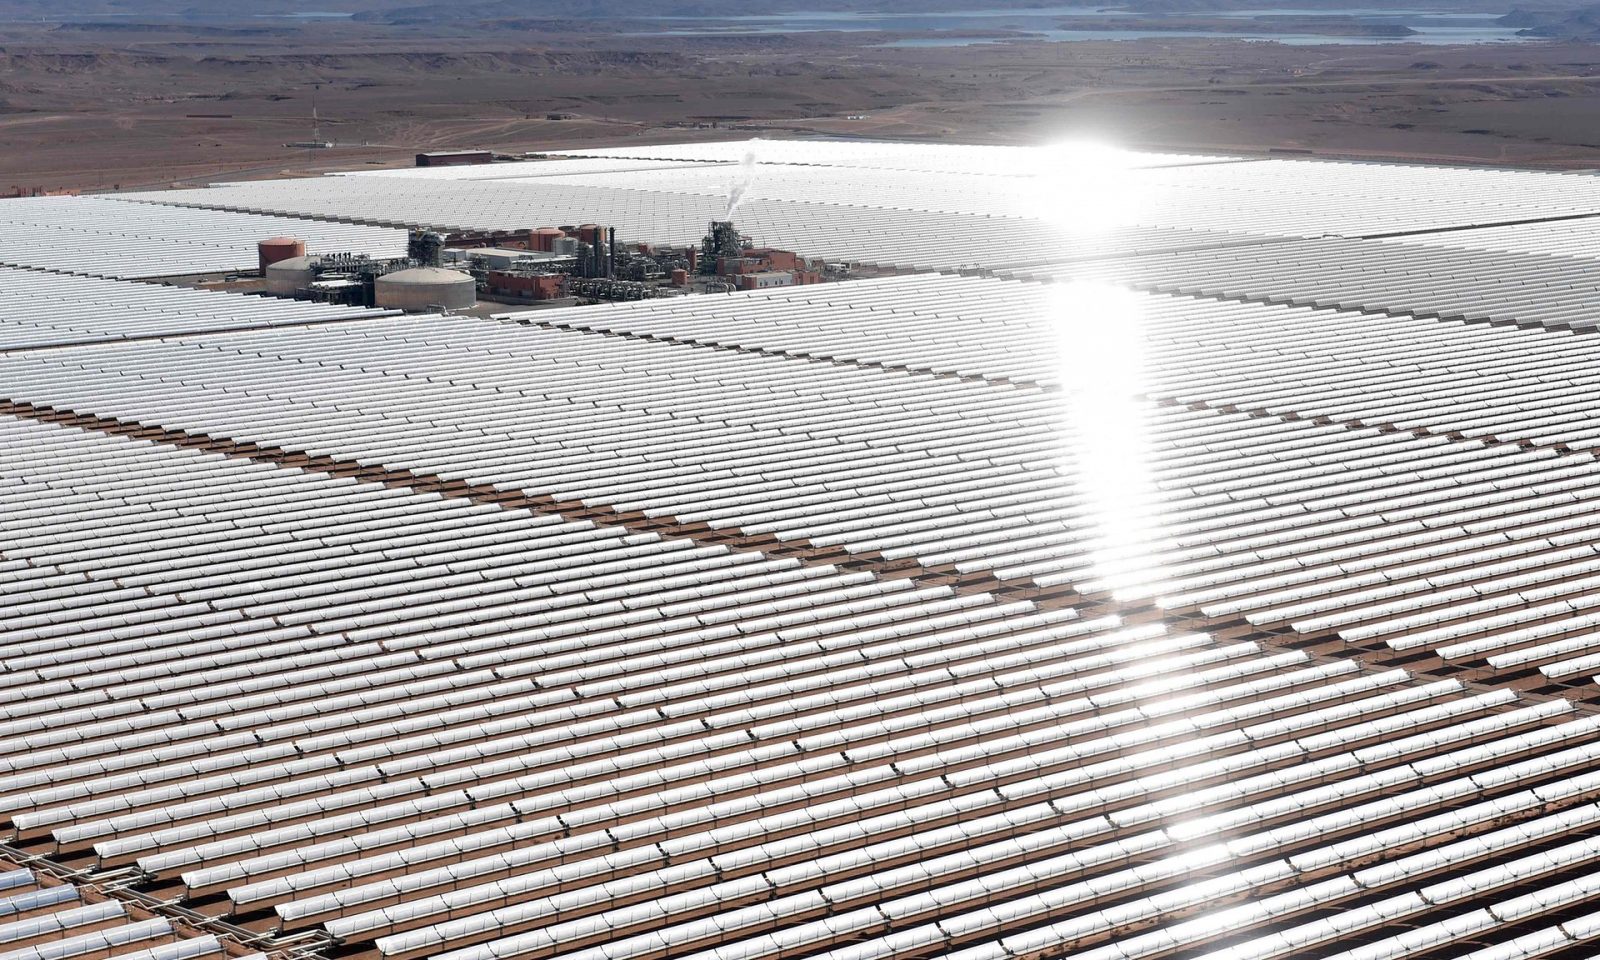 Nour 1 concentrated Solar Power Plant in Ouarzate Photograph: Fadel Senna/AFP/Getty Images